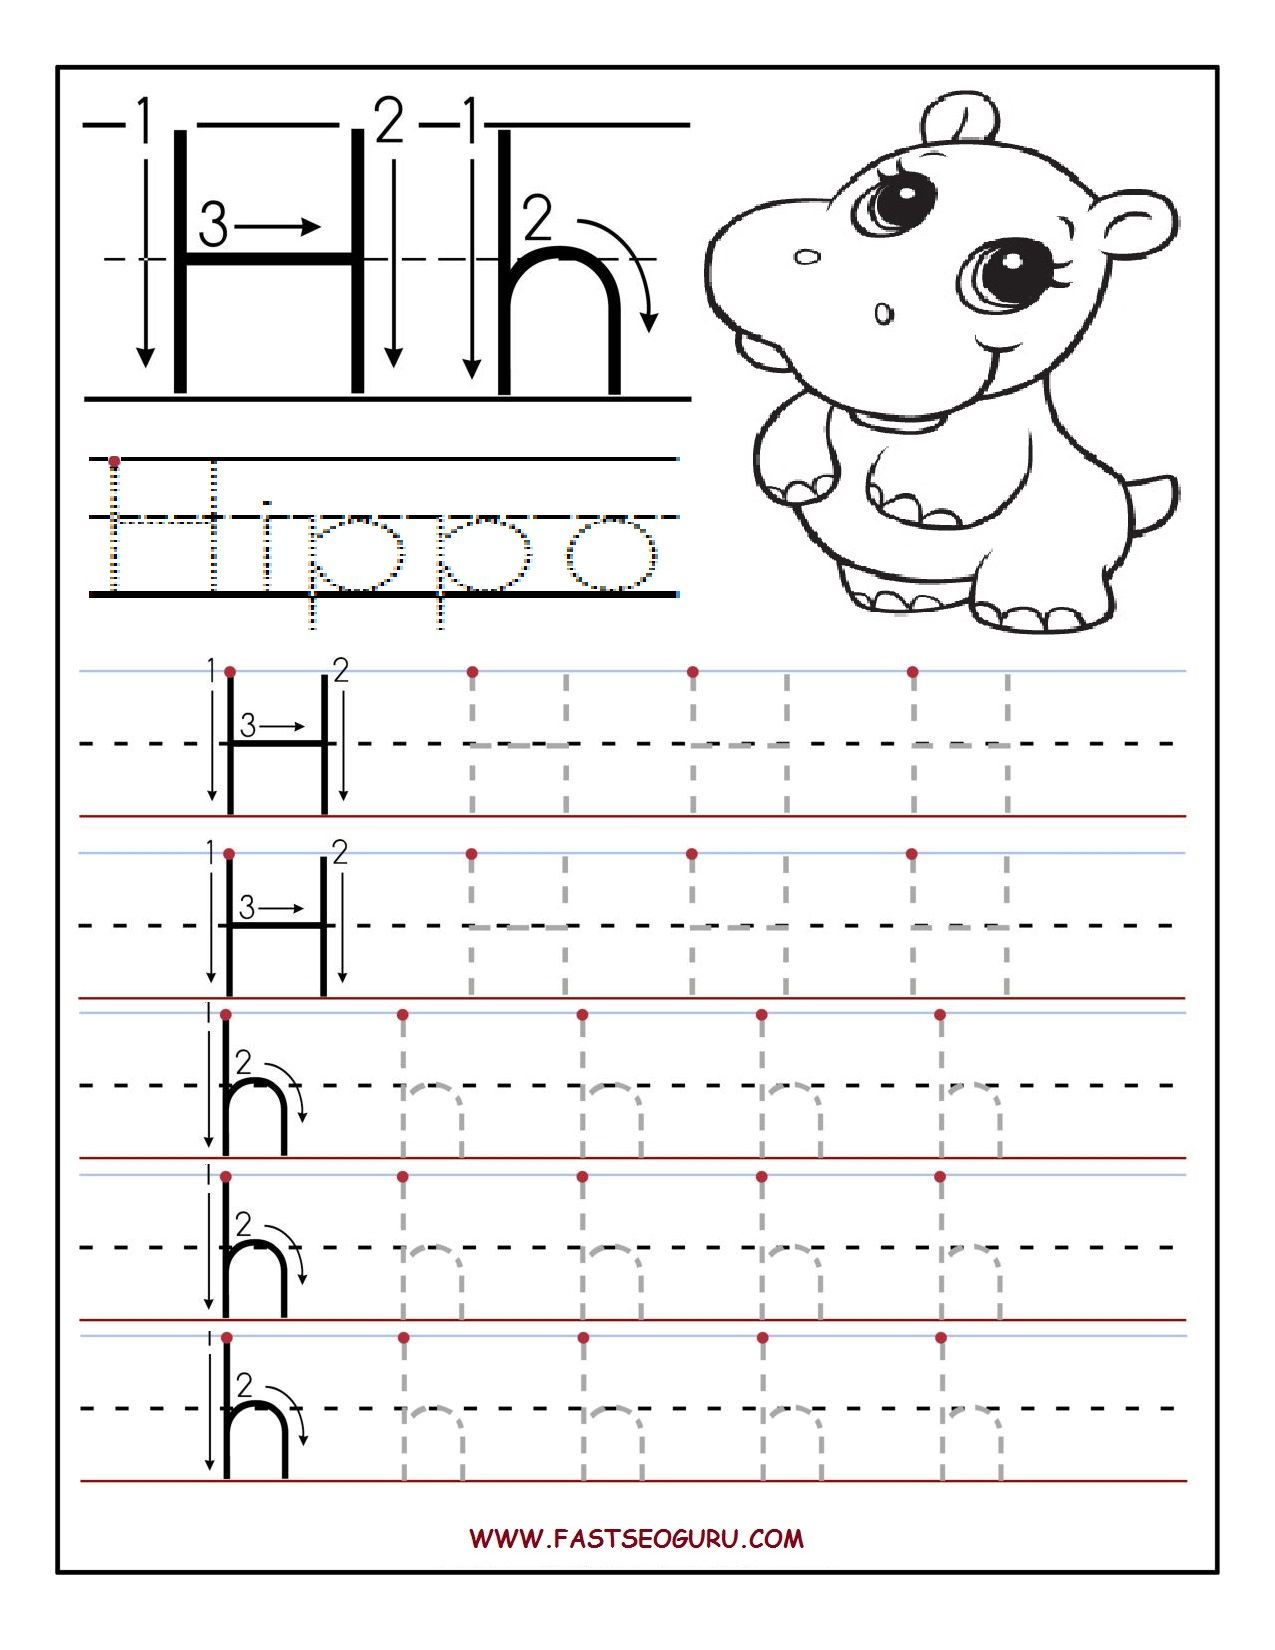 Printable Letter H Tracing Worksheets For Preschool intended for Letter Tracing H